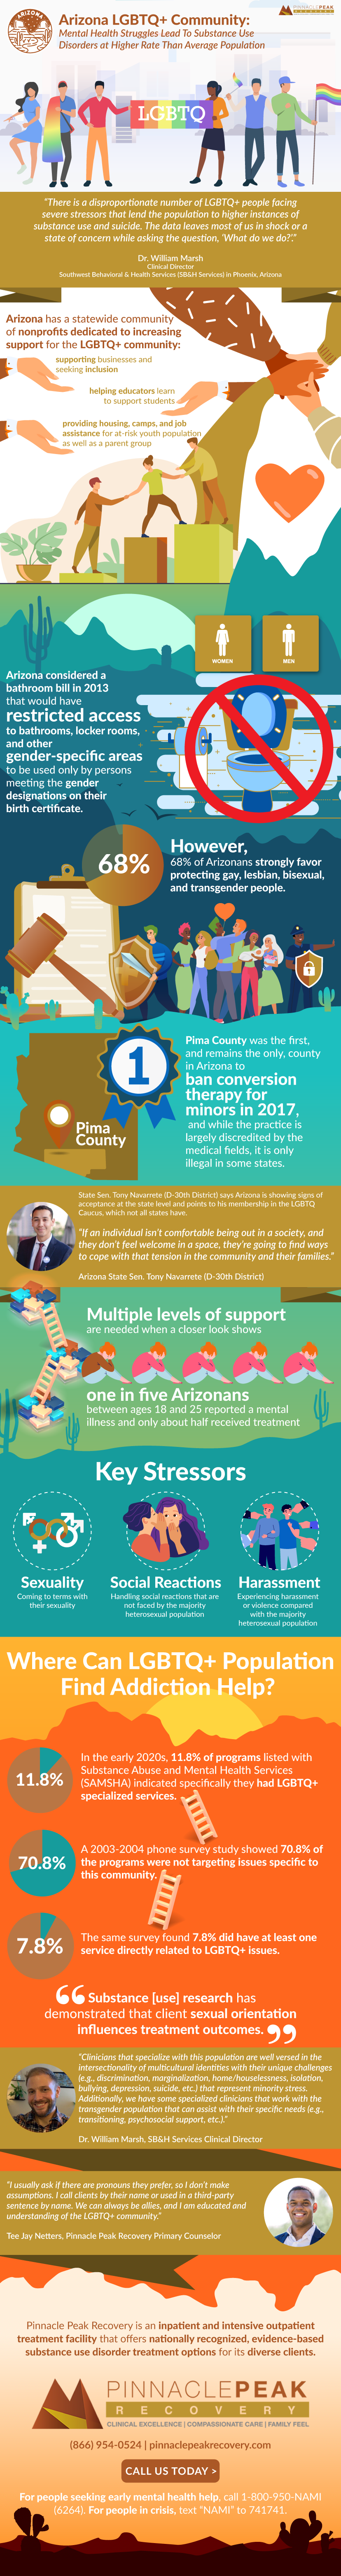 LGBTQ Substance use infographic